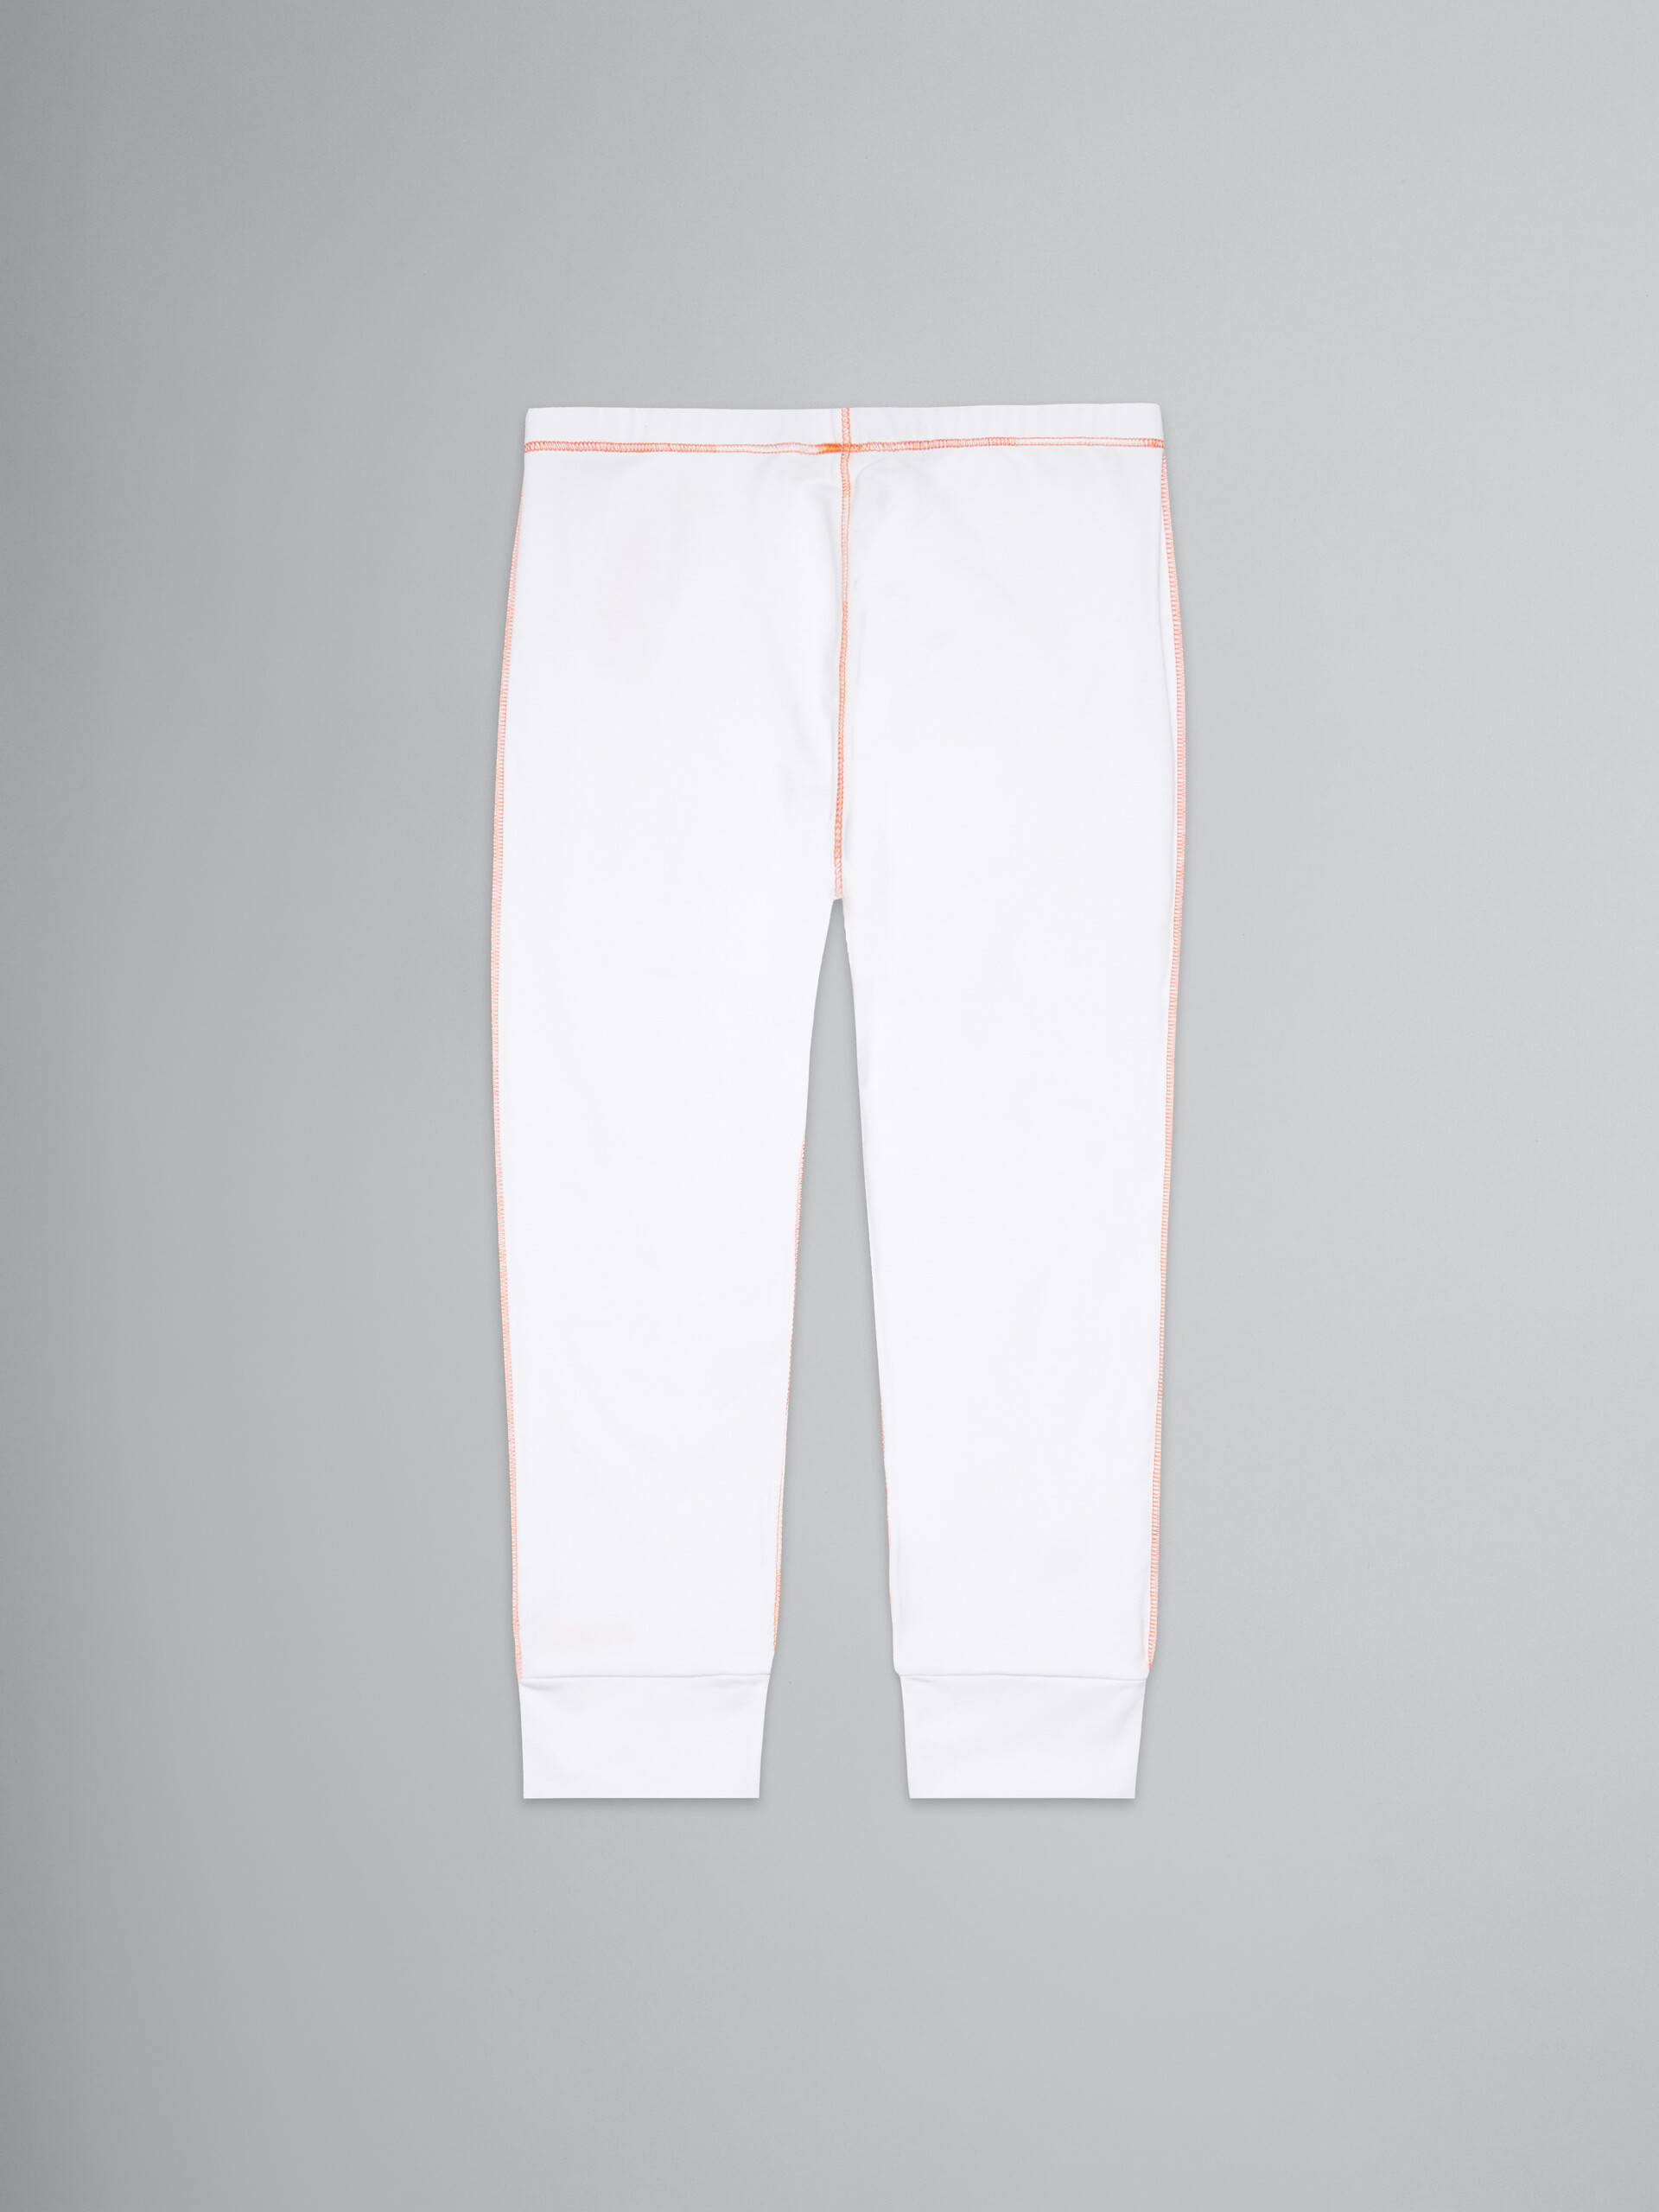 Whitw leggings pants with stitching - Pants - Image 2